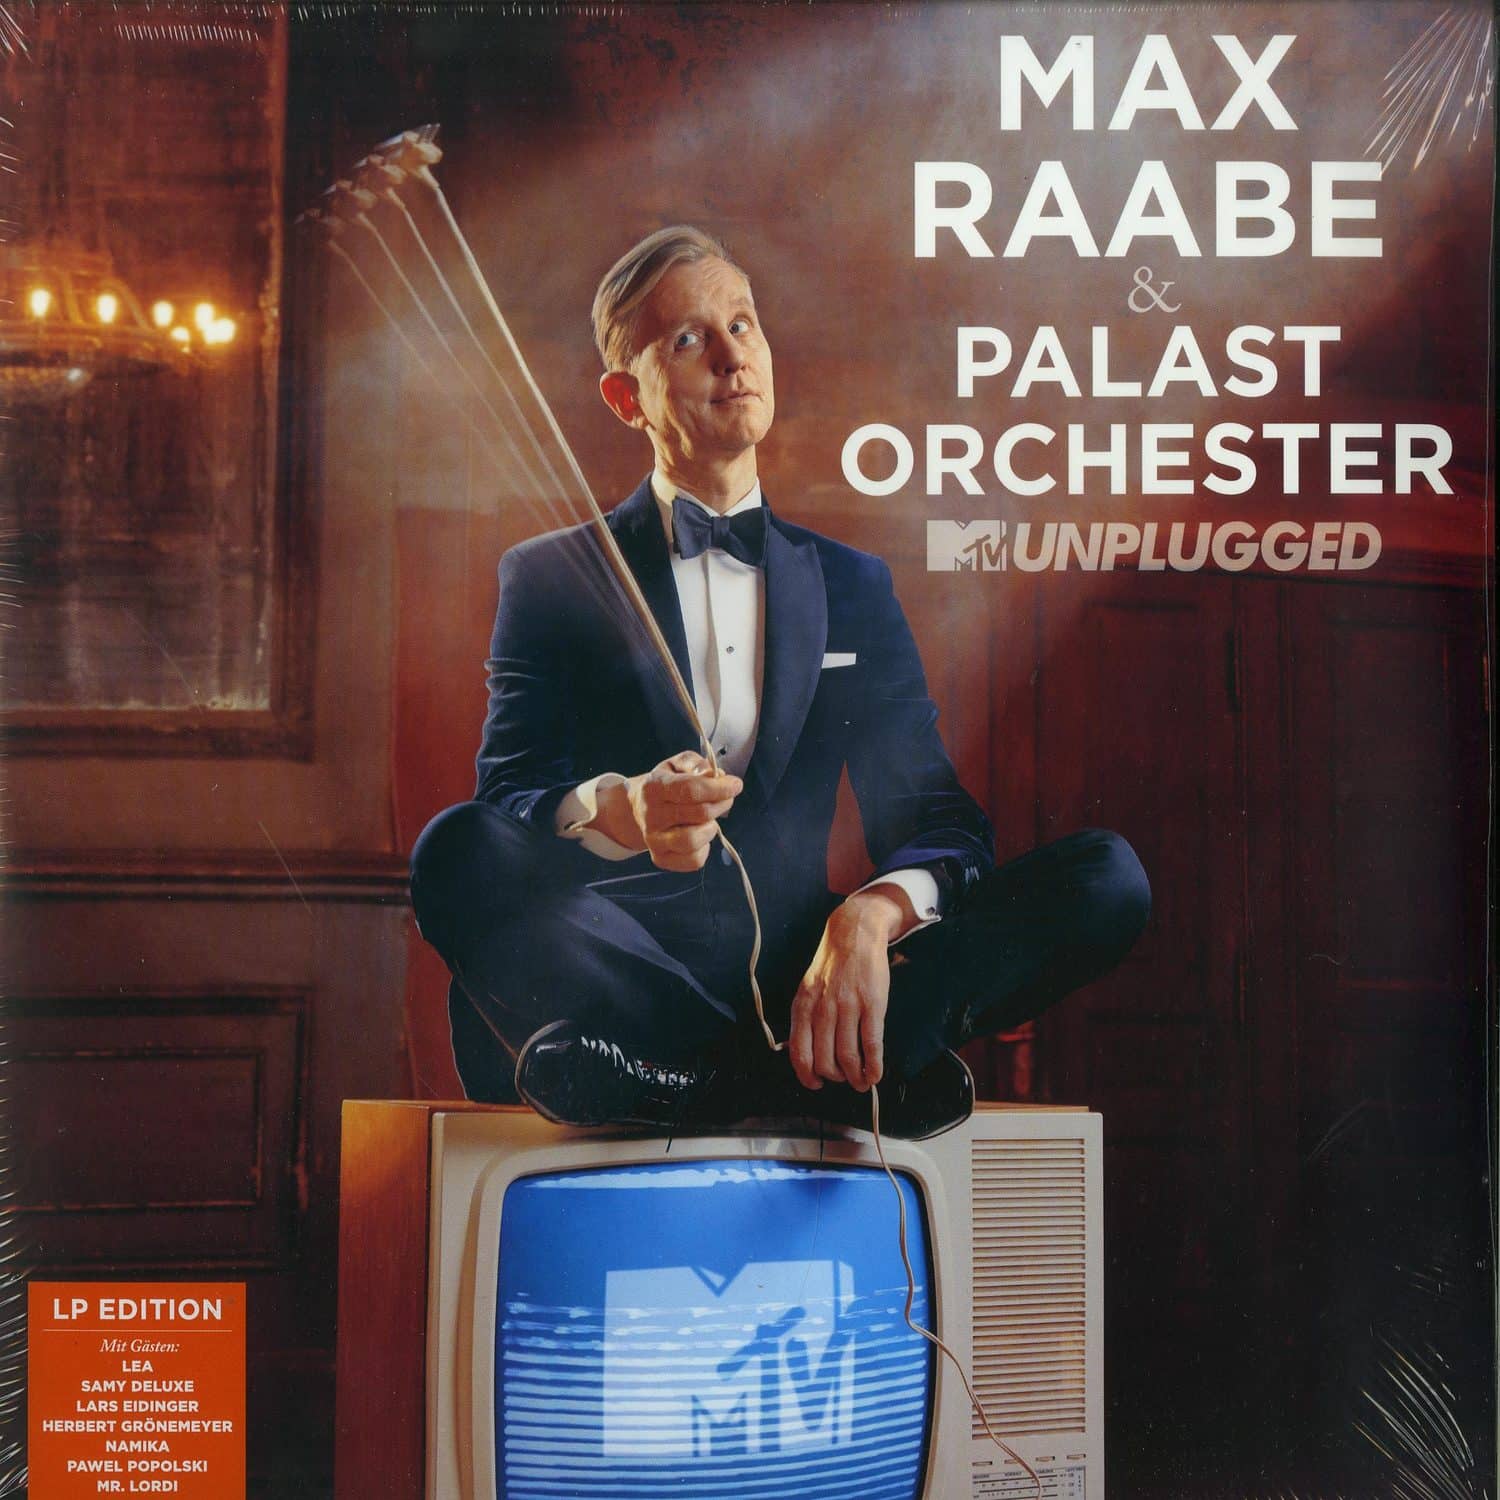 Max Raabe & Palast Orchester - MTV UNPLUGGED 